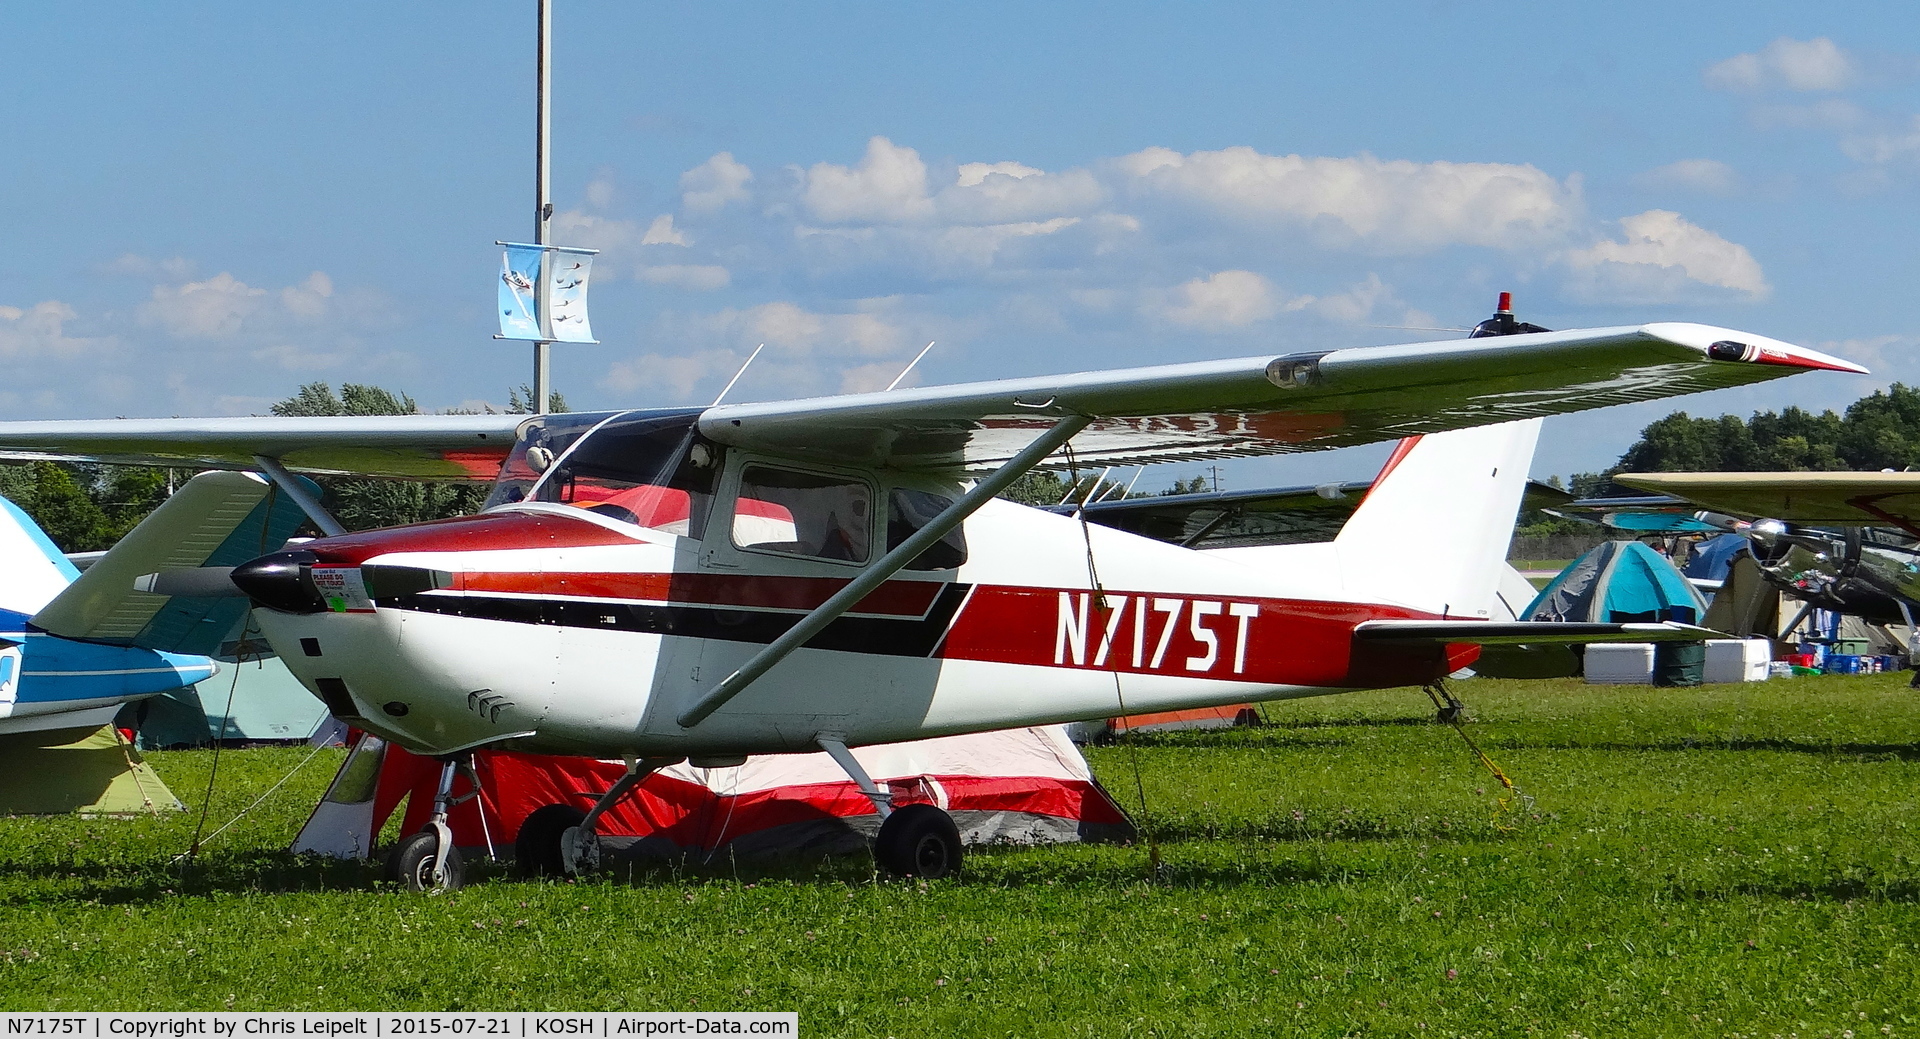 N7175T, 1959 Cessna 172A C/N 46775, Minesota-based 1959 Cessna 172A at EAA AirVenture 2015.